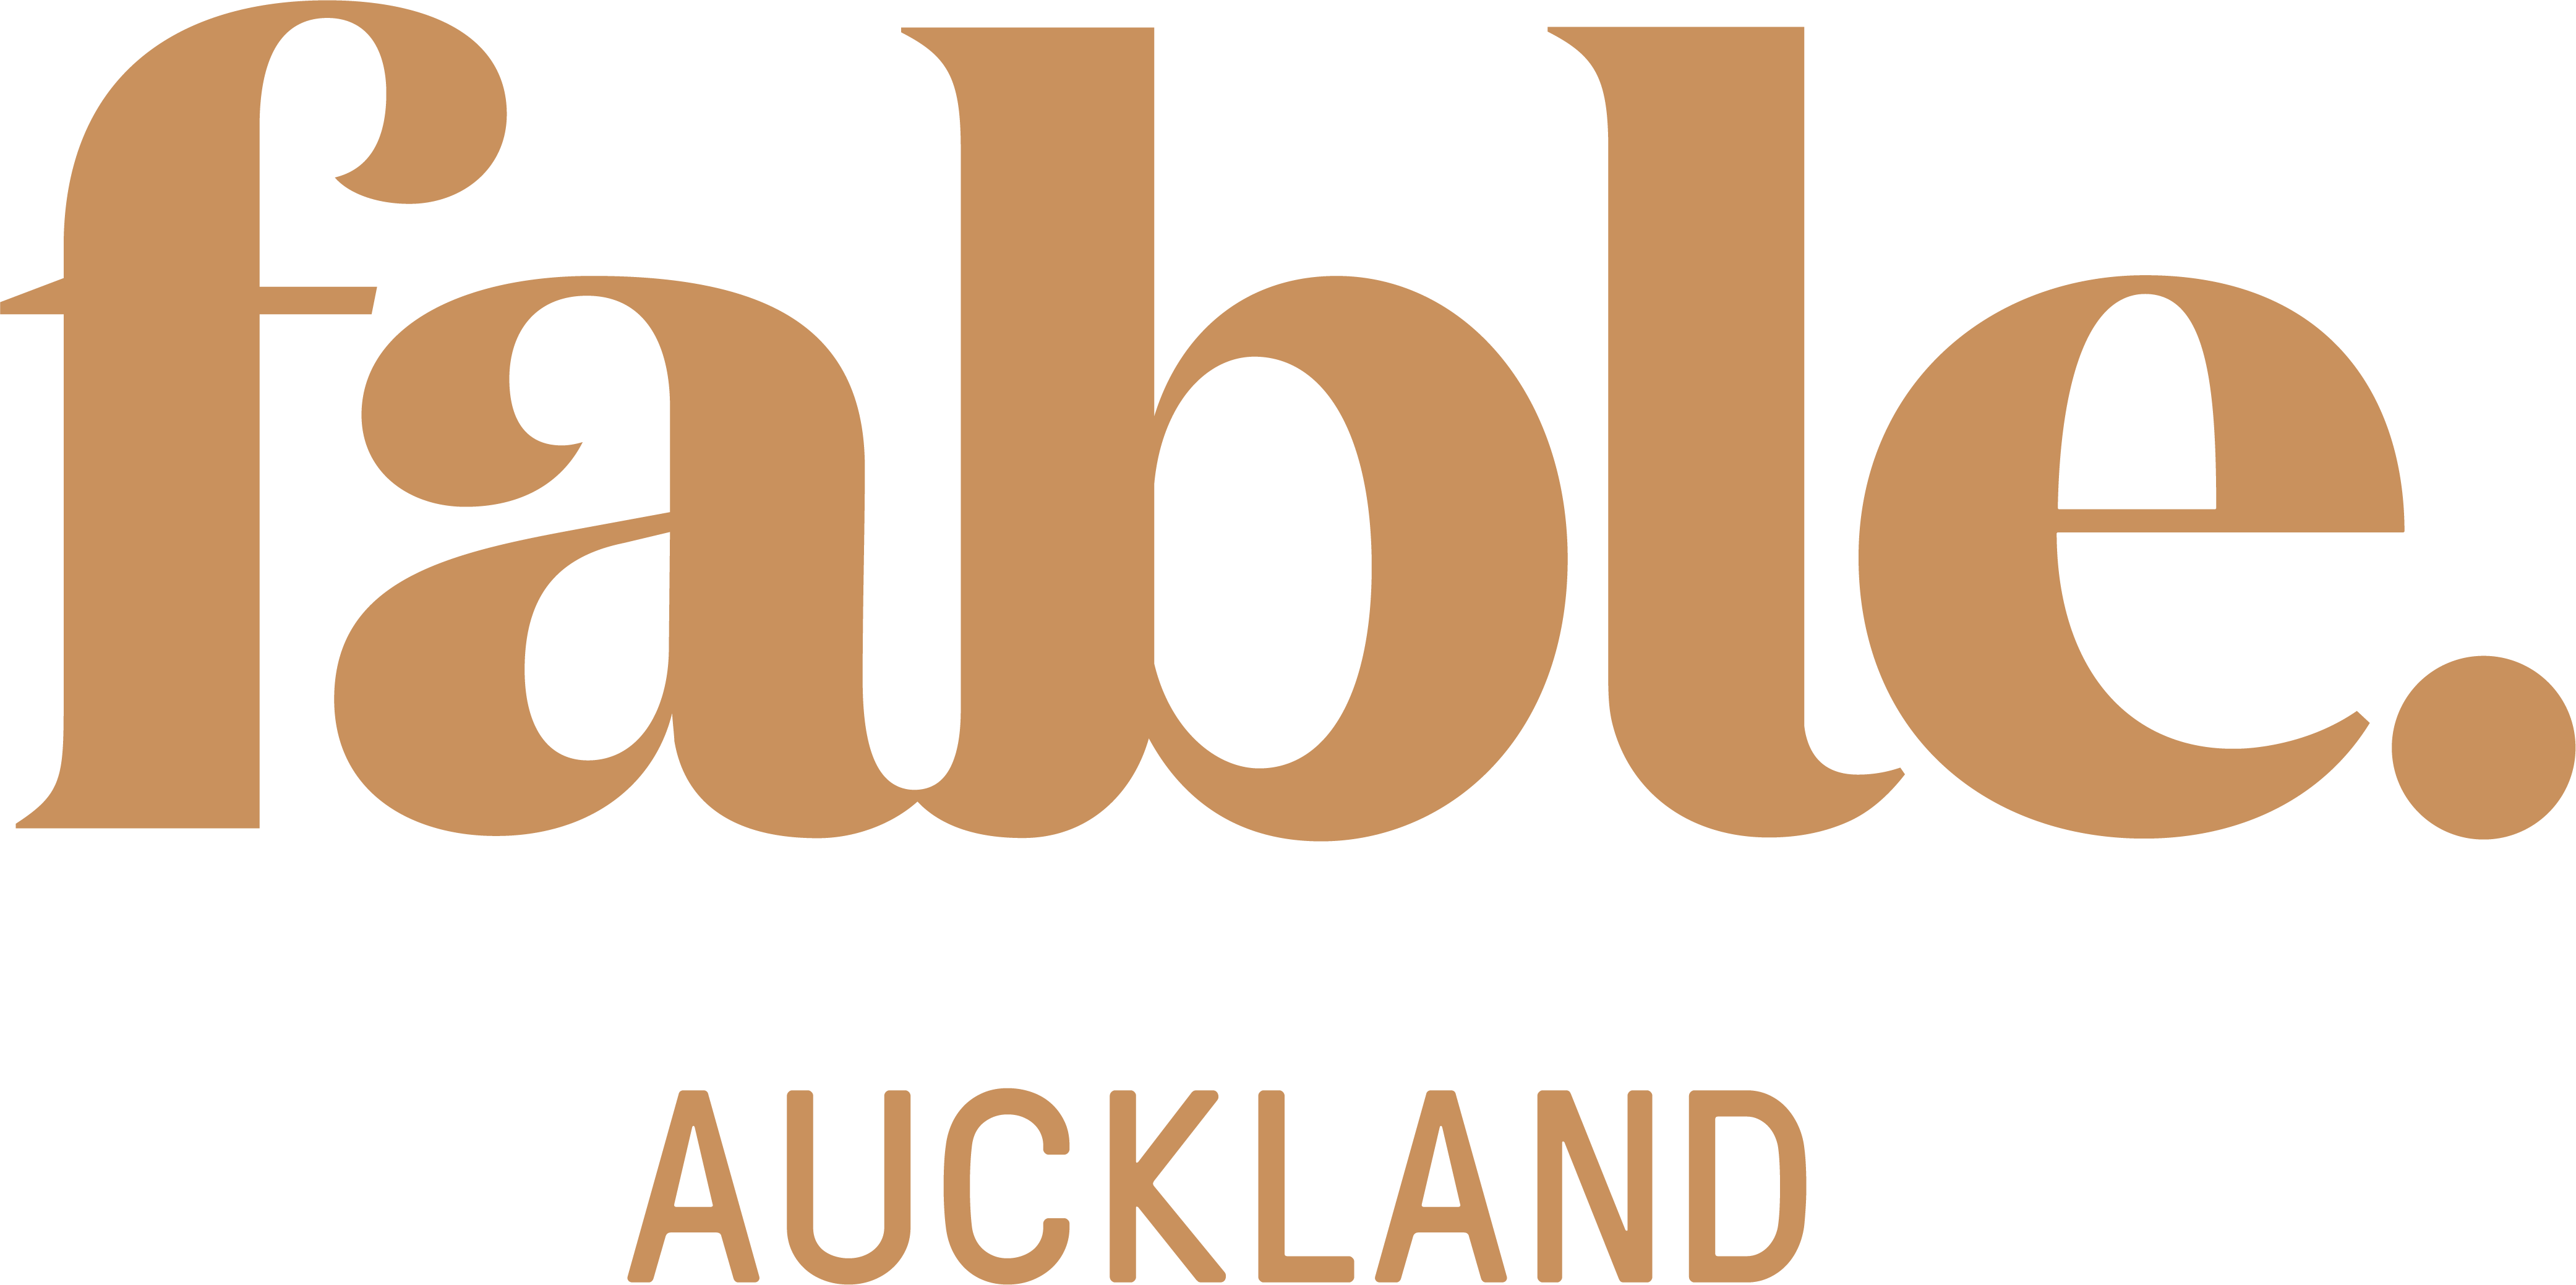 
Fable Auckland